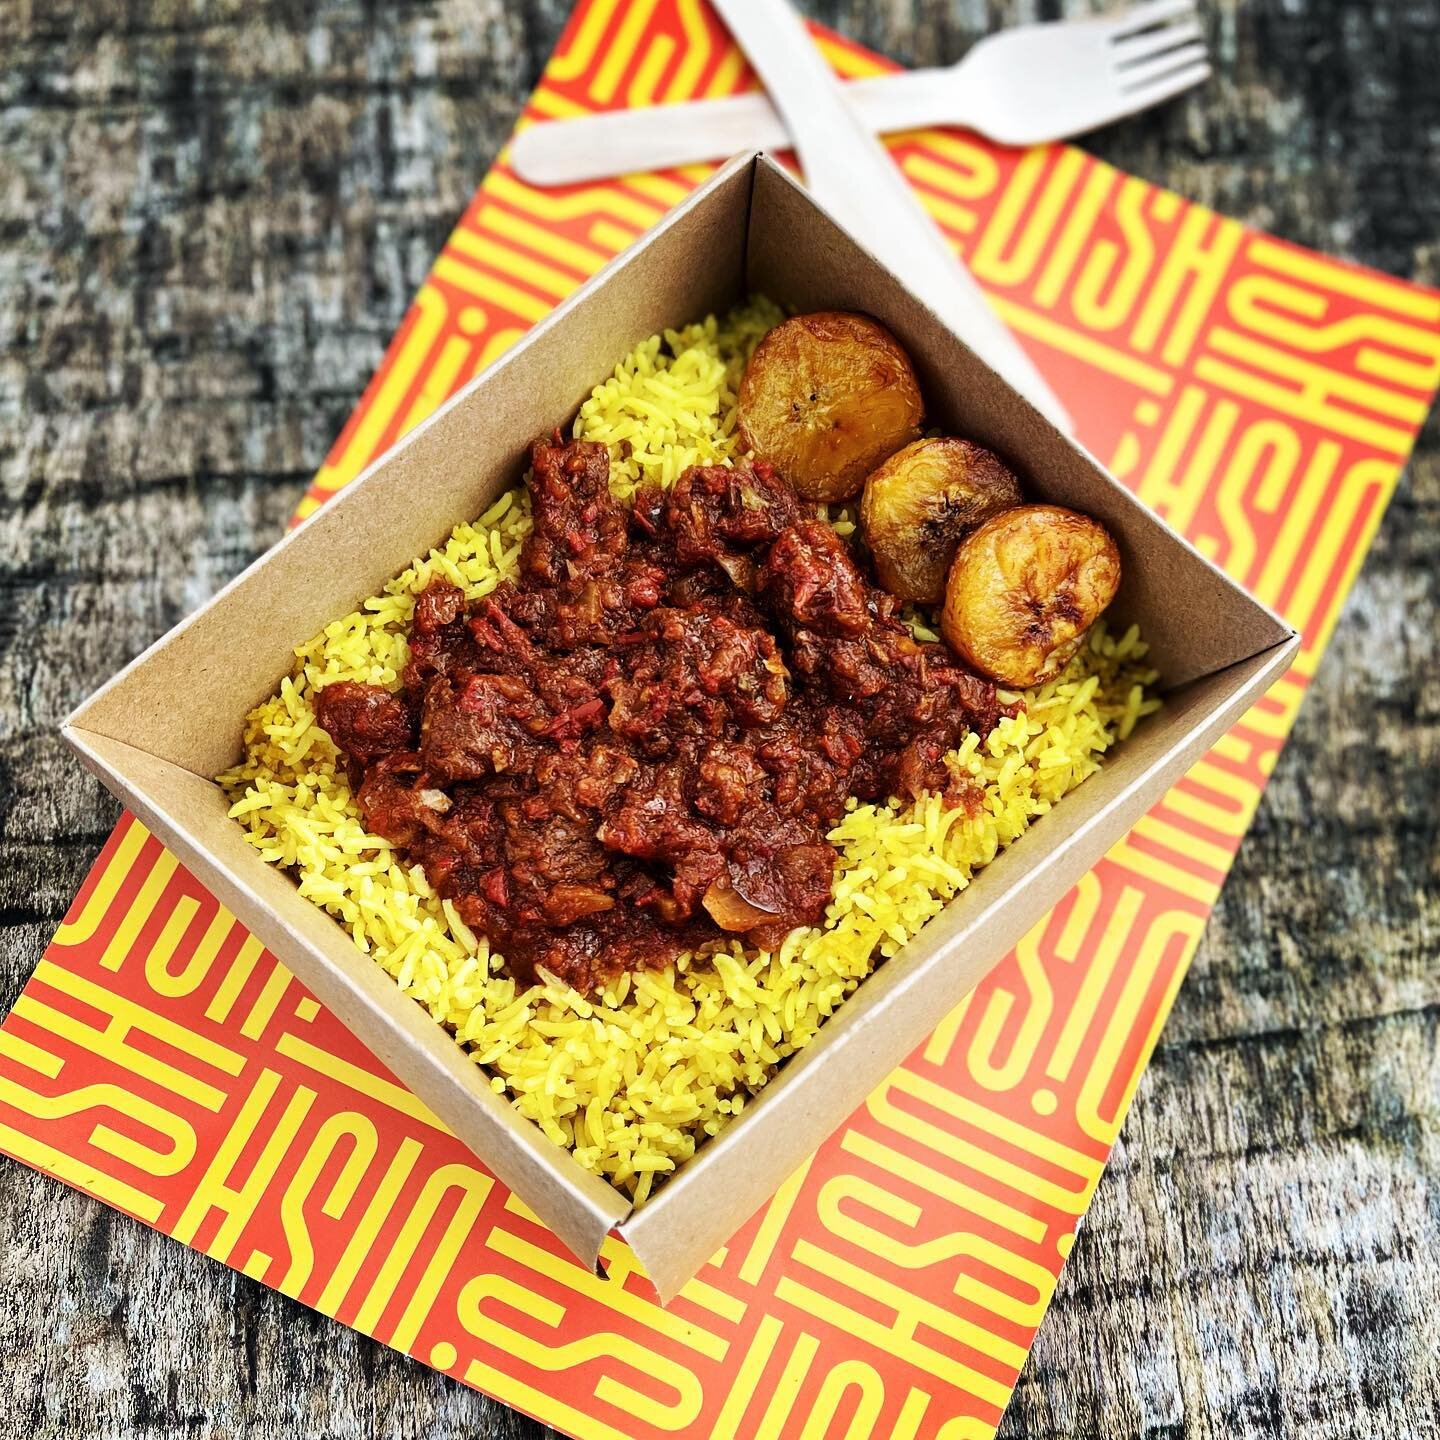 Kathma&rsquo;s warming Cameroonian Beef Stew with yellow rice 🇨🇲 soooo good! Have you tried it yet? Only at DiSH 😋

#cameroon #beefstew #flavour #dishfood #harwell #winterwarmers #tasty #afrocaribbean #onlyatdish #spiceupyourlife #glutenfree #dair